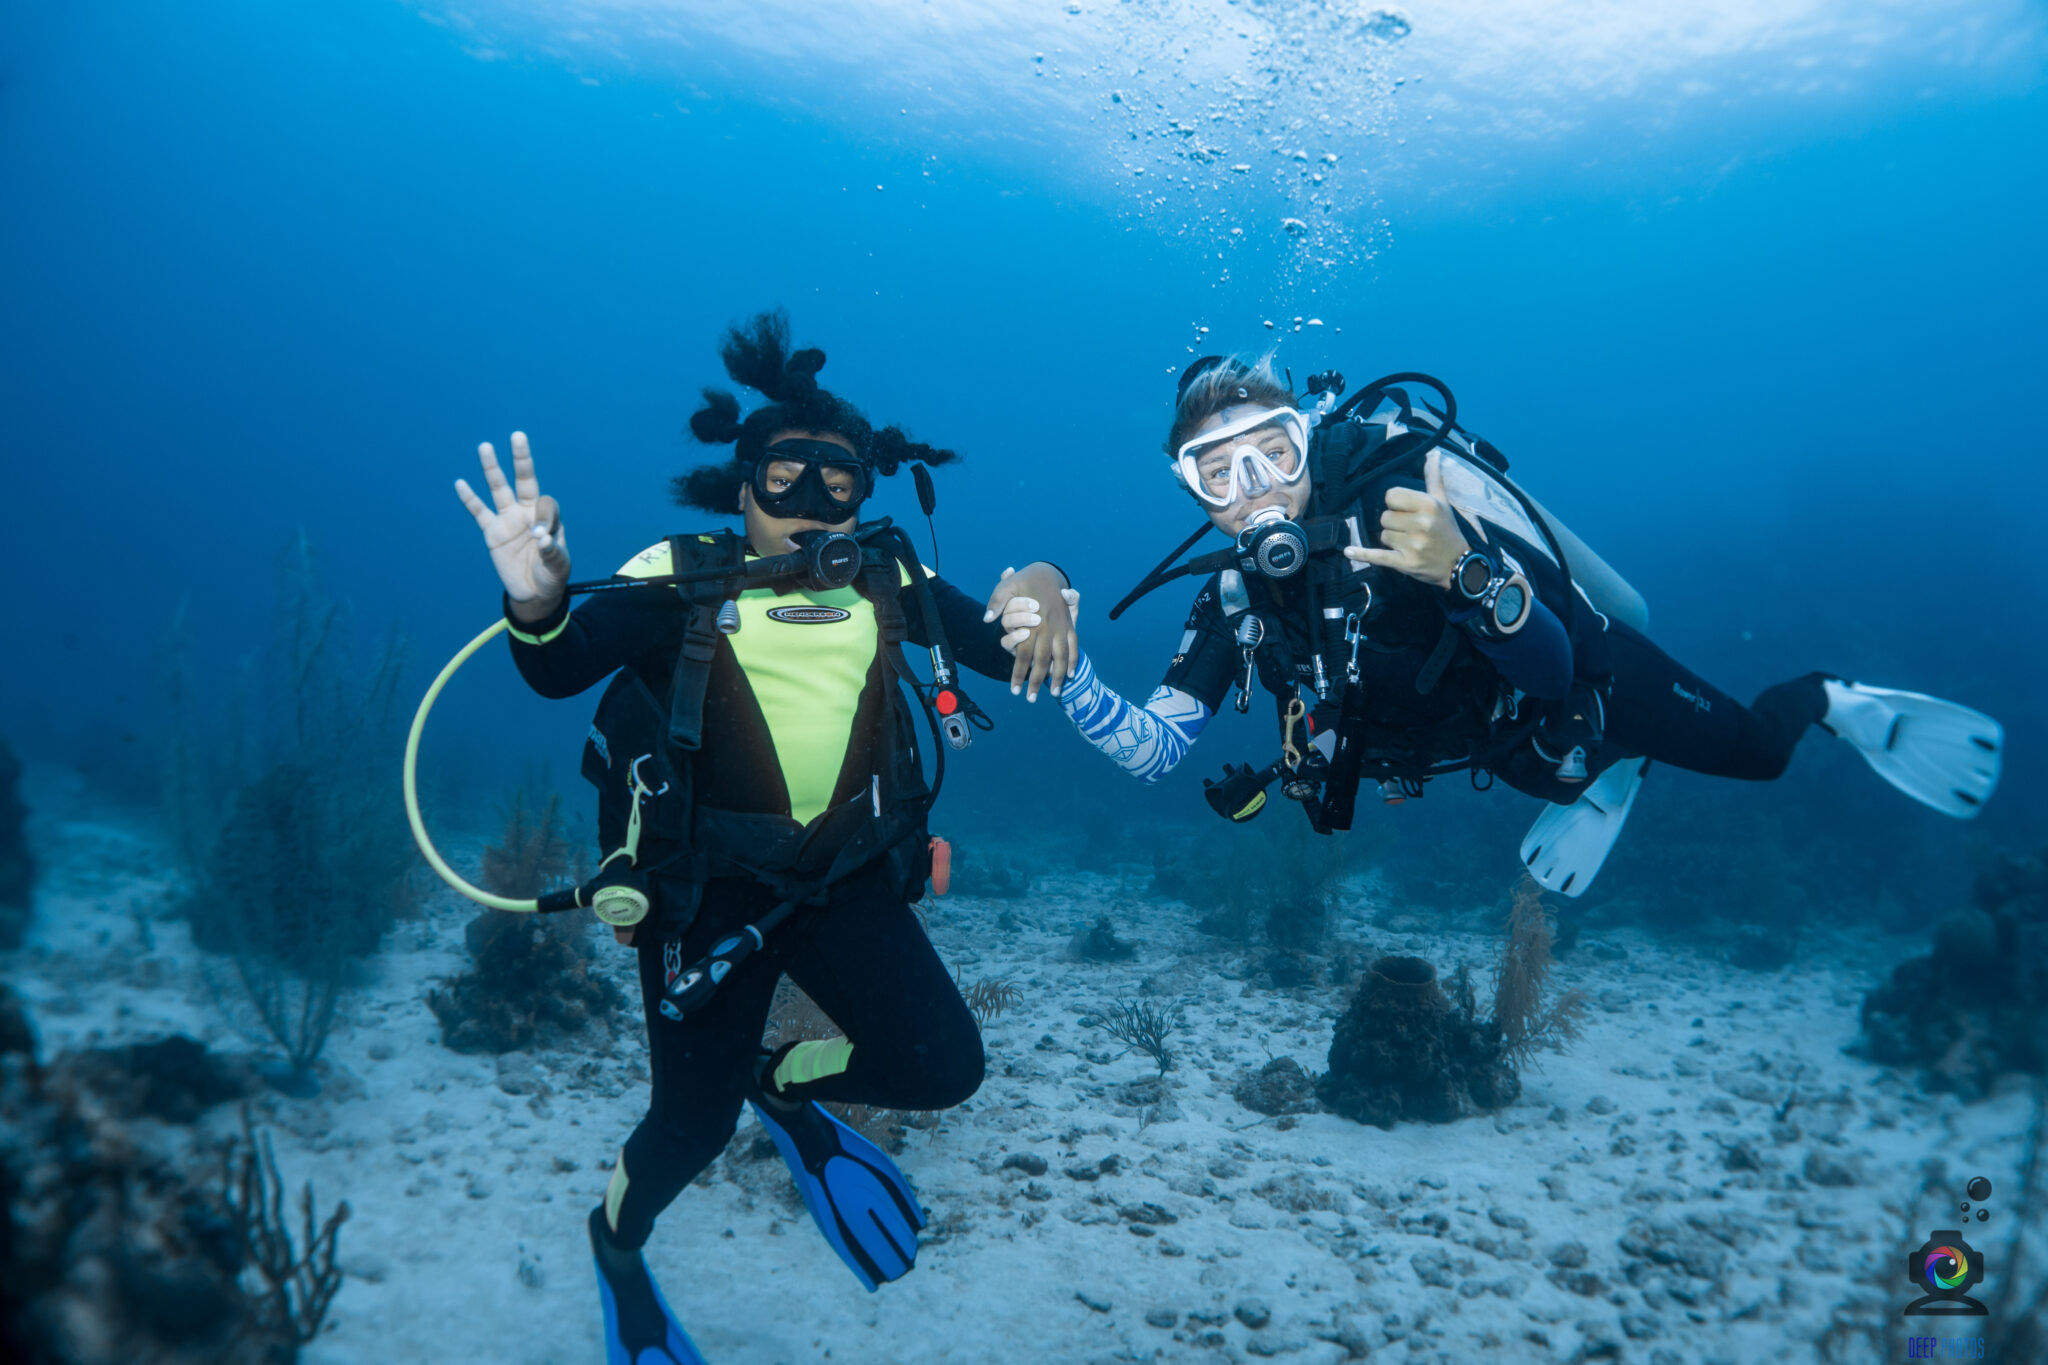 Woman dive leader holding hands with a young diver underwater